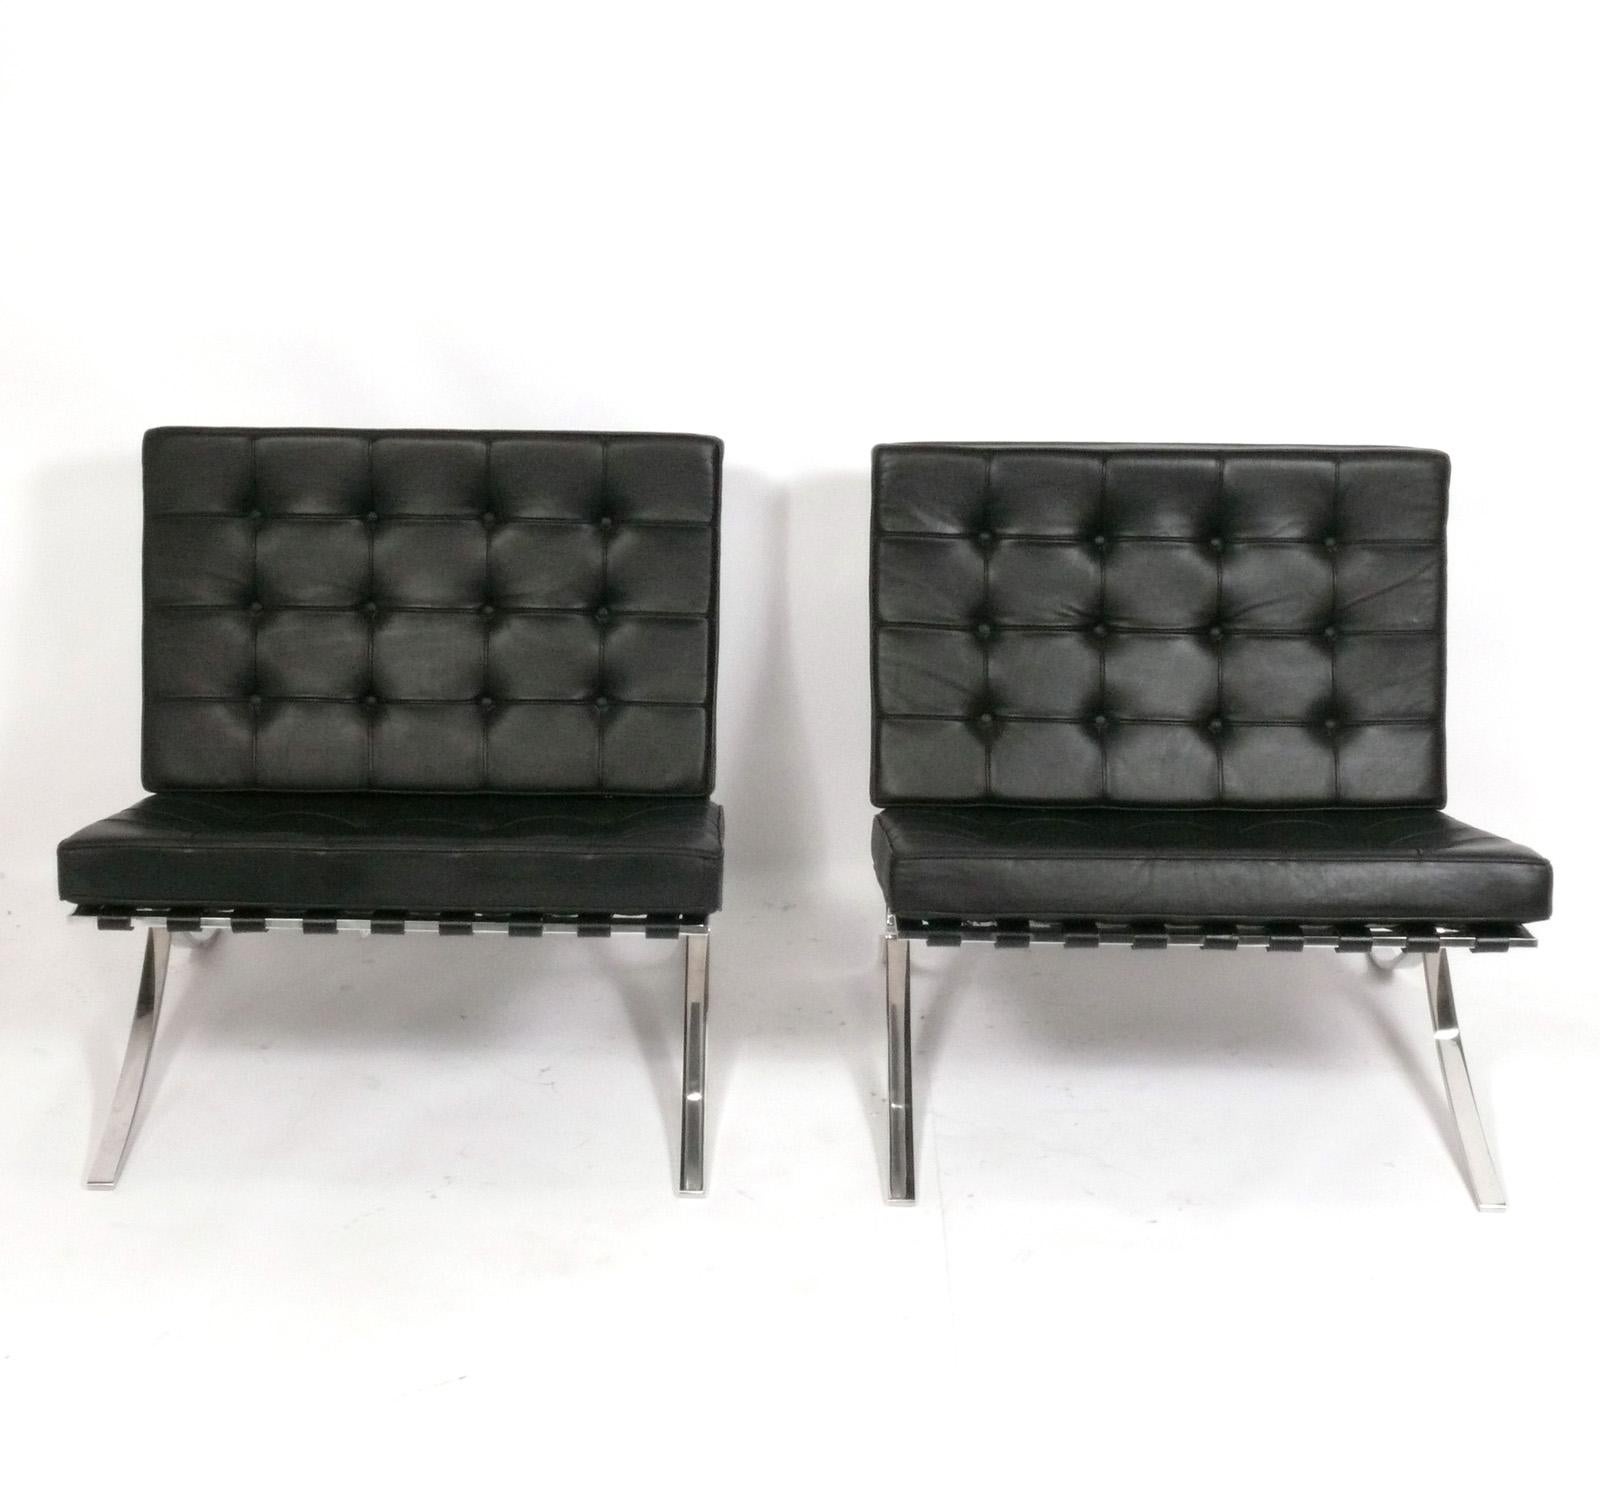 Iconic Barcelona Lounge Chairs, designed by Ludwig Mies van der Rohe for Knoll, American, circa 1979. Signed with Knoll labels underneath. The leather retains it's warm original patina. The leather has been cleaned and conditioned. They are priced